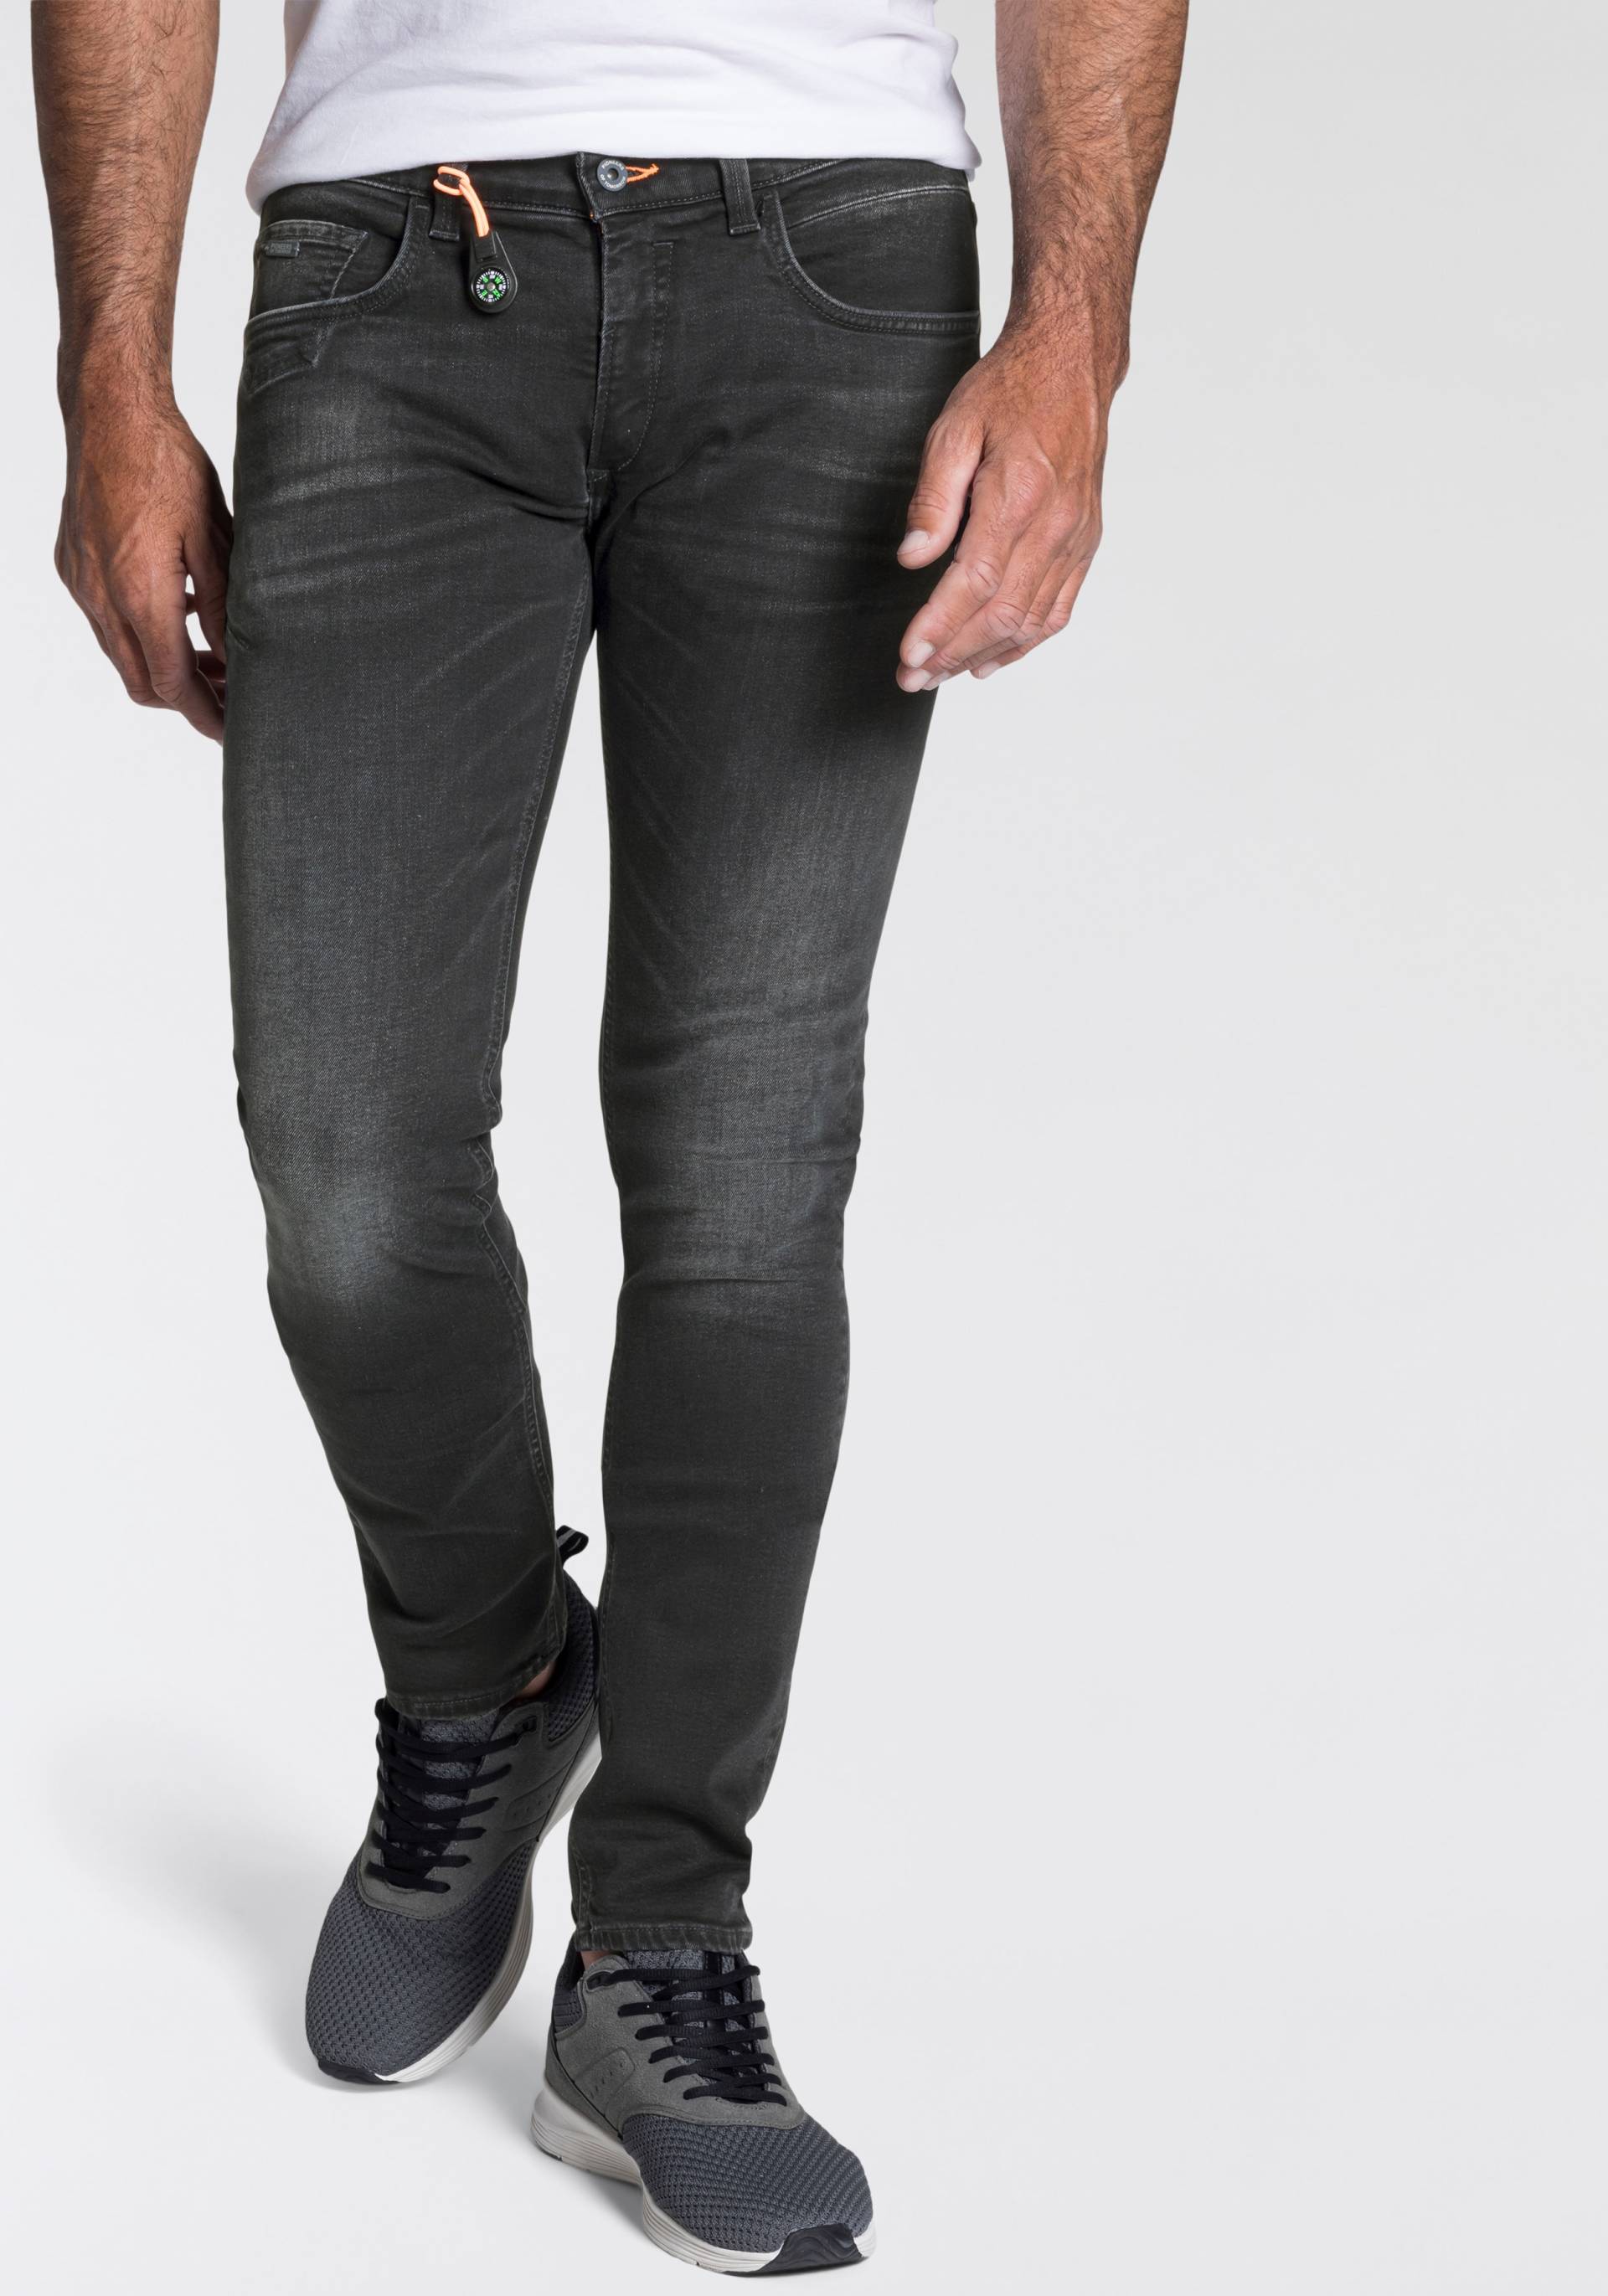 Pioneer Authentic Jeans Slim-fit-Jeans »Ethan« von Pioneer Authentic Jeans